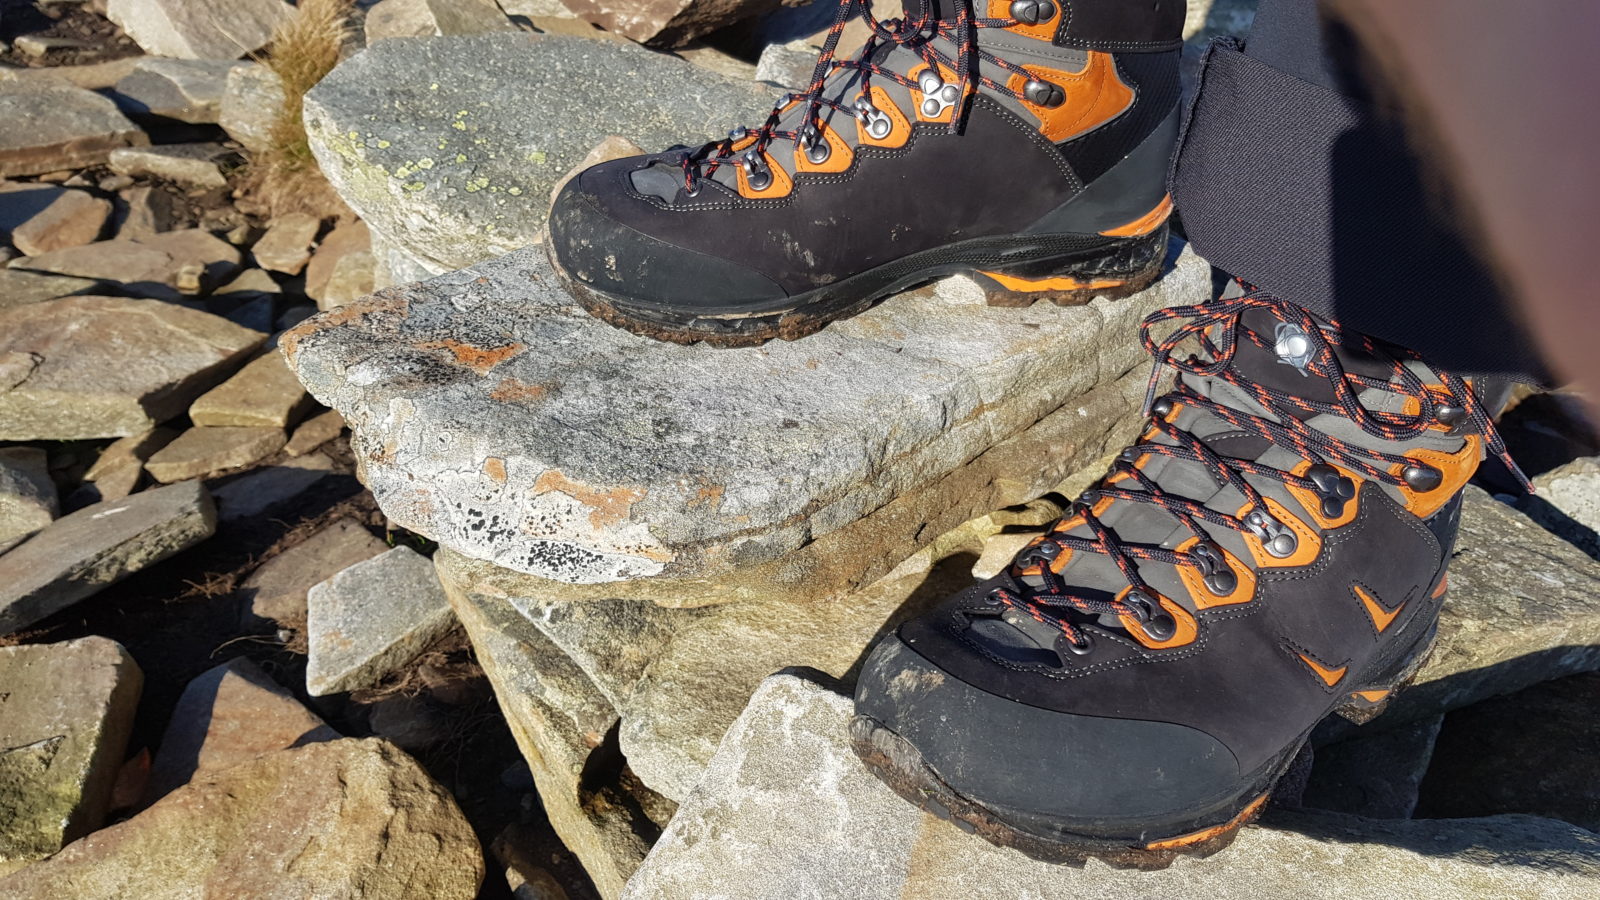 output fenomeen Geslaagd Lowa Camino GTX review - The Best Trekking Boots I've Ever Owned